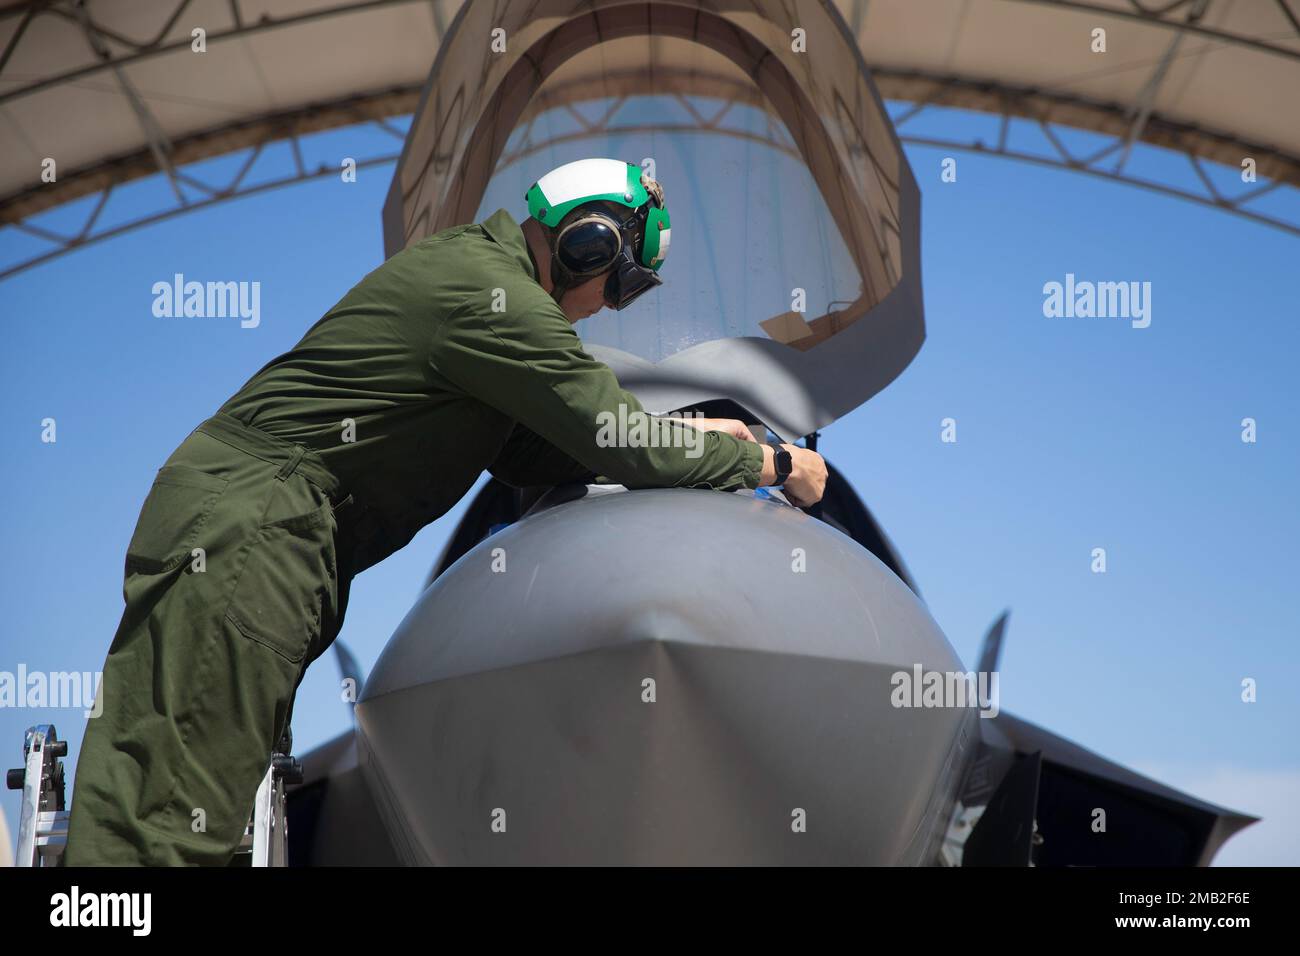 U.S. Marine Corps Lance Cpl. Logan Runnells, a fixed-wing aircraft mechanic with Marine Fighter Attack Squadron (VMFA) 122, 13th Marine Expeditionary Unit, inspects the nose of an F-35B Lightning II during Realistic Urban Training exercise at Marine Corps Air Station Yuma, Arizona, June 9, 2022. The purpose of RUT is to enhance the integration and collective capability of the MEU's command, air, ground, and logistics elements and prepare the 13th MEU to meet the nation's crisis response needs during its upcoming overseas deployment. Stock Photo